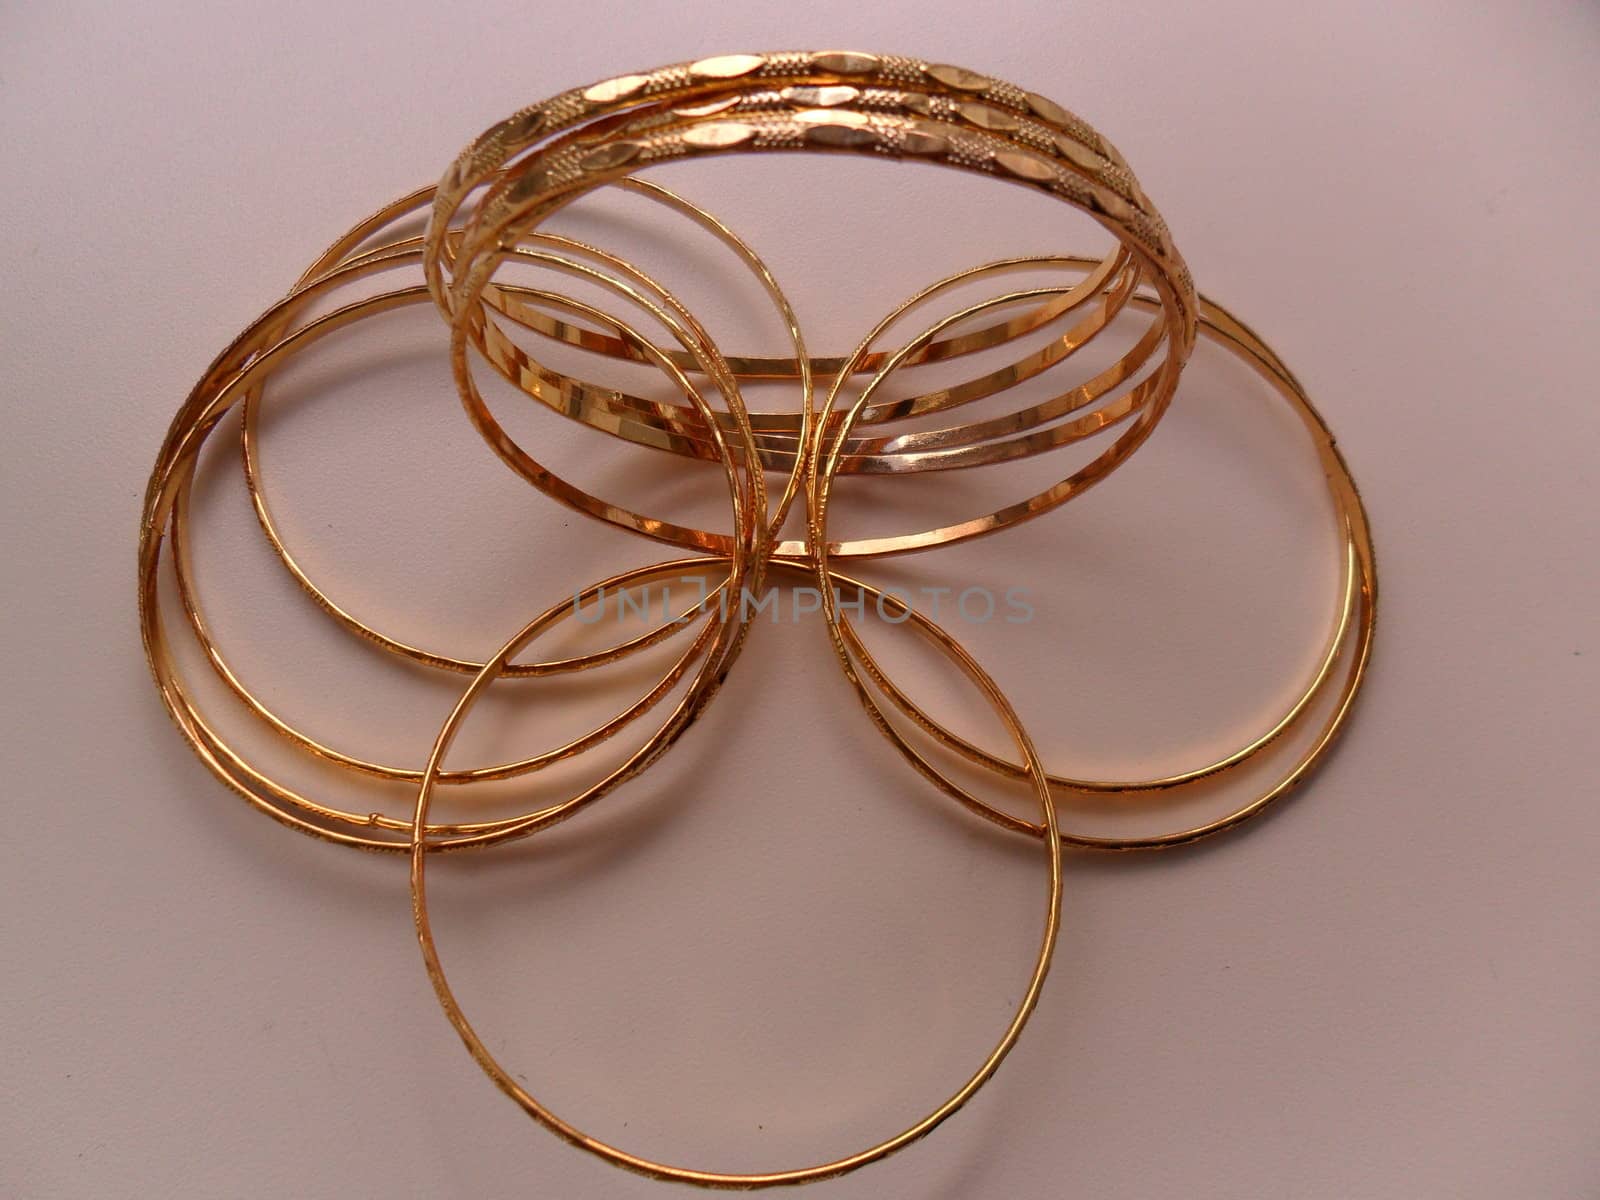 women's jewelry in the form of shiny metal
rings and rose gold color